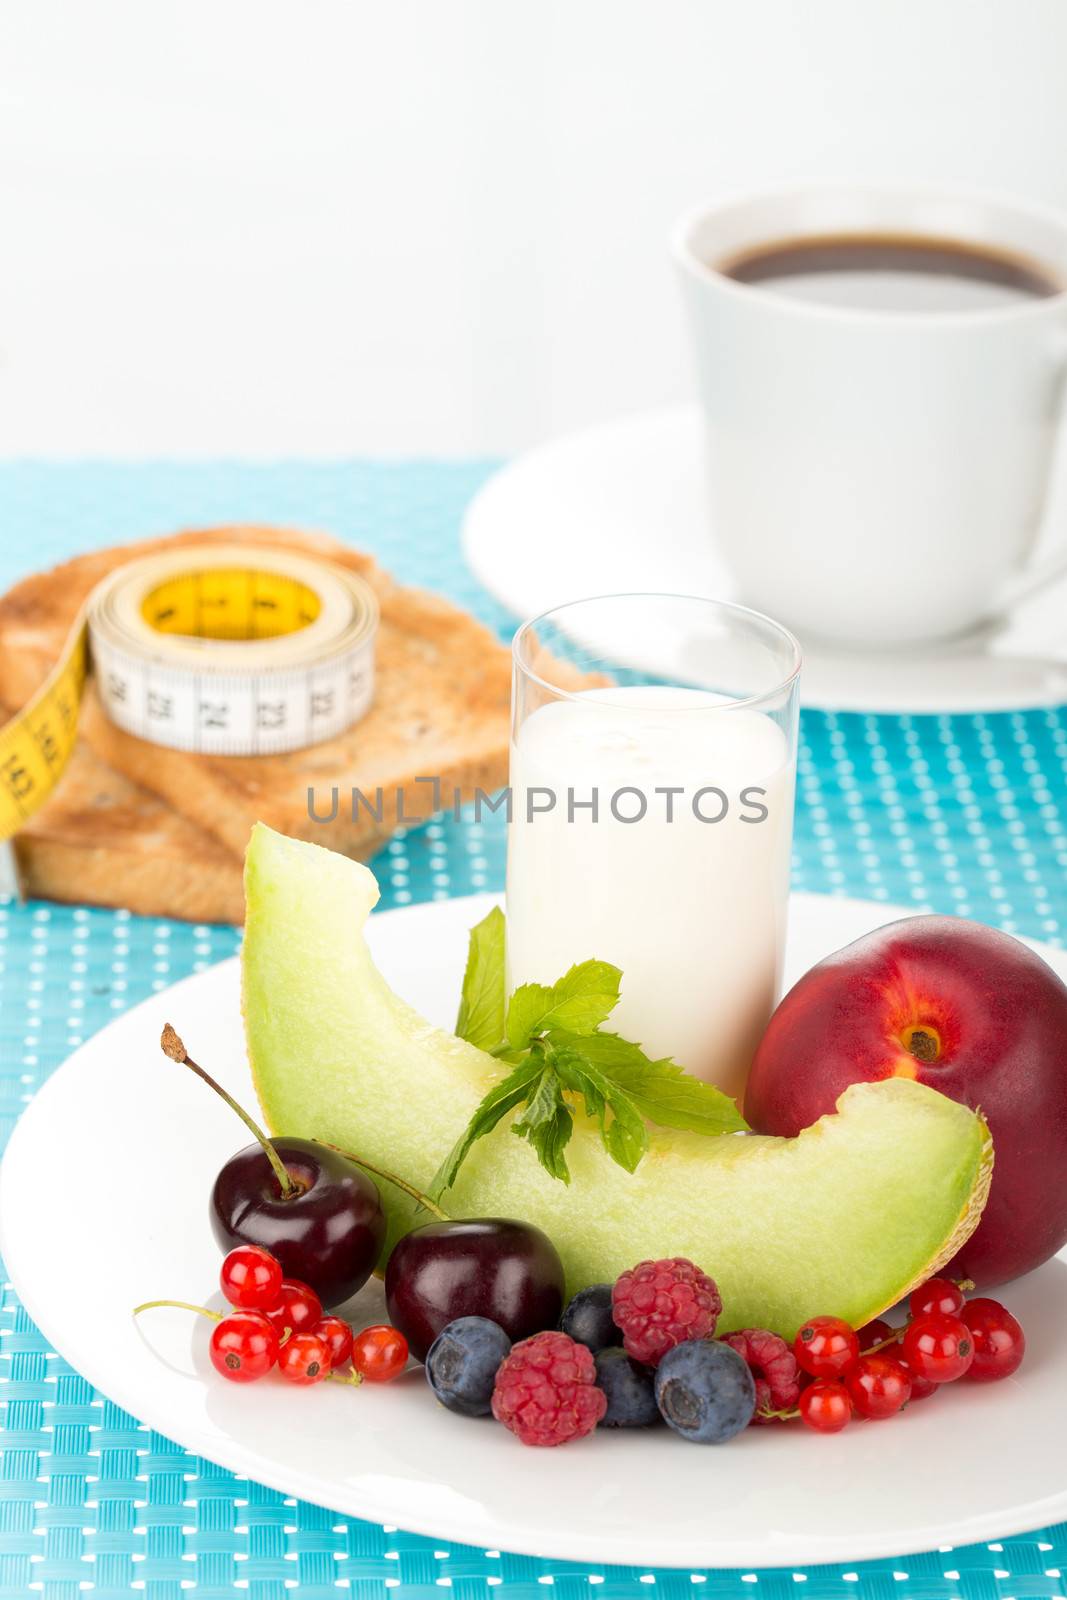 Healthy breakfast with a plate of fresh fruits, glass of milk and cup of coffee.